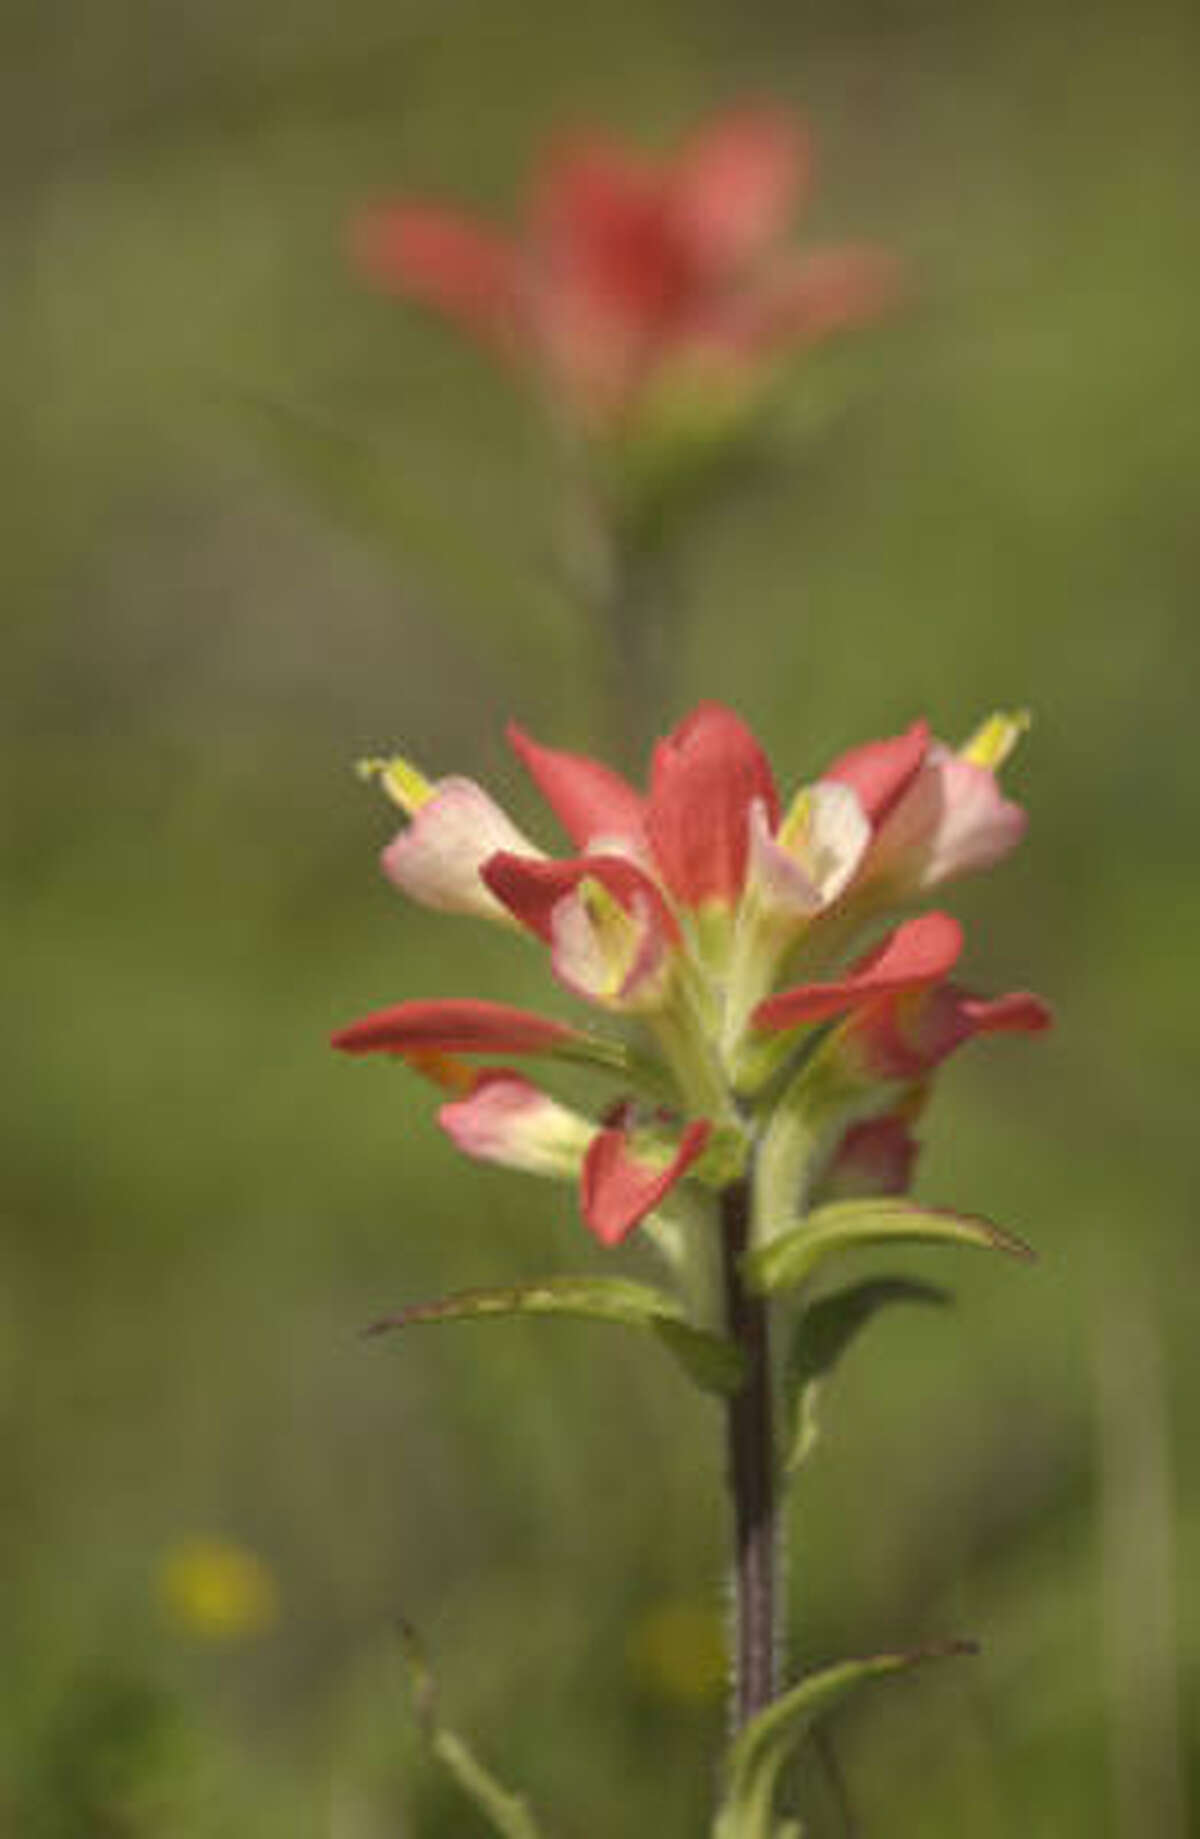 Indian paintbrush (Castilleja indivisa): The red-orange bracts of this popular wildflower mimic a Texas sunset and nearly hide the inconspicuous cream flowers. A member of the snapdragon family, the paintbrush is 8 to 16 inches tall and has slender, hairy leaves. It's often a bluebonnet companion. Blooms: March-May.